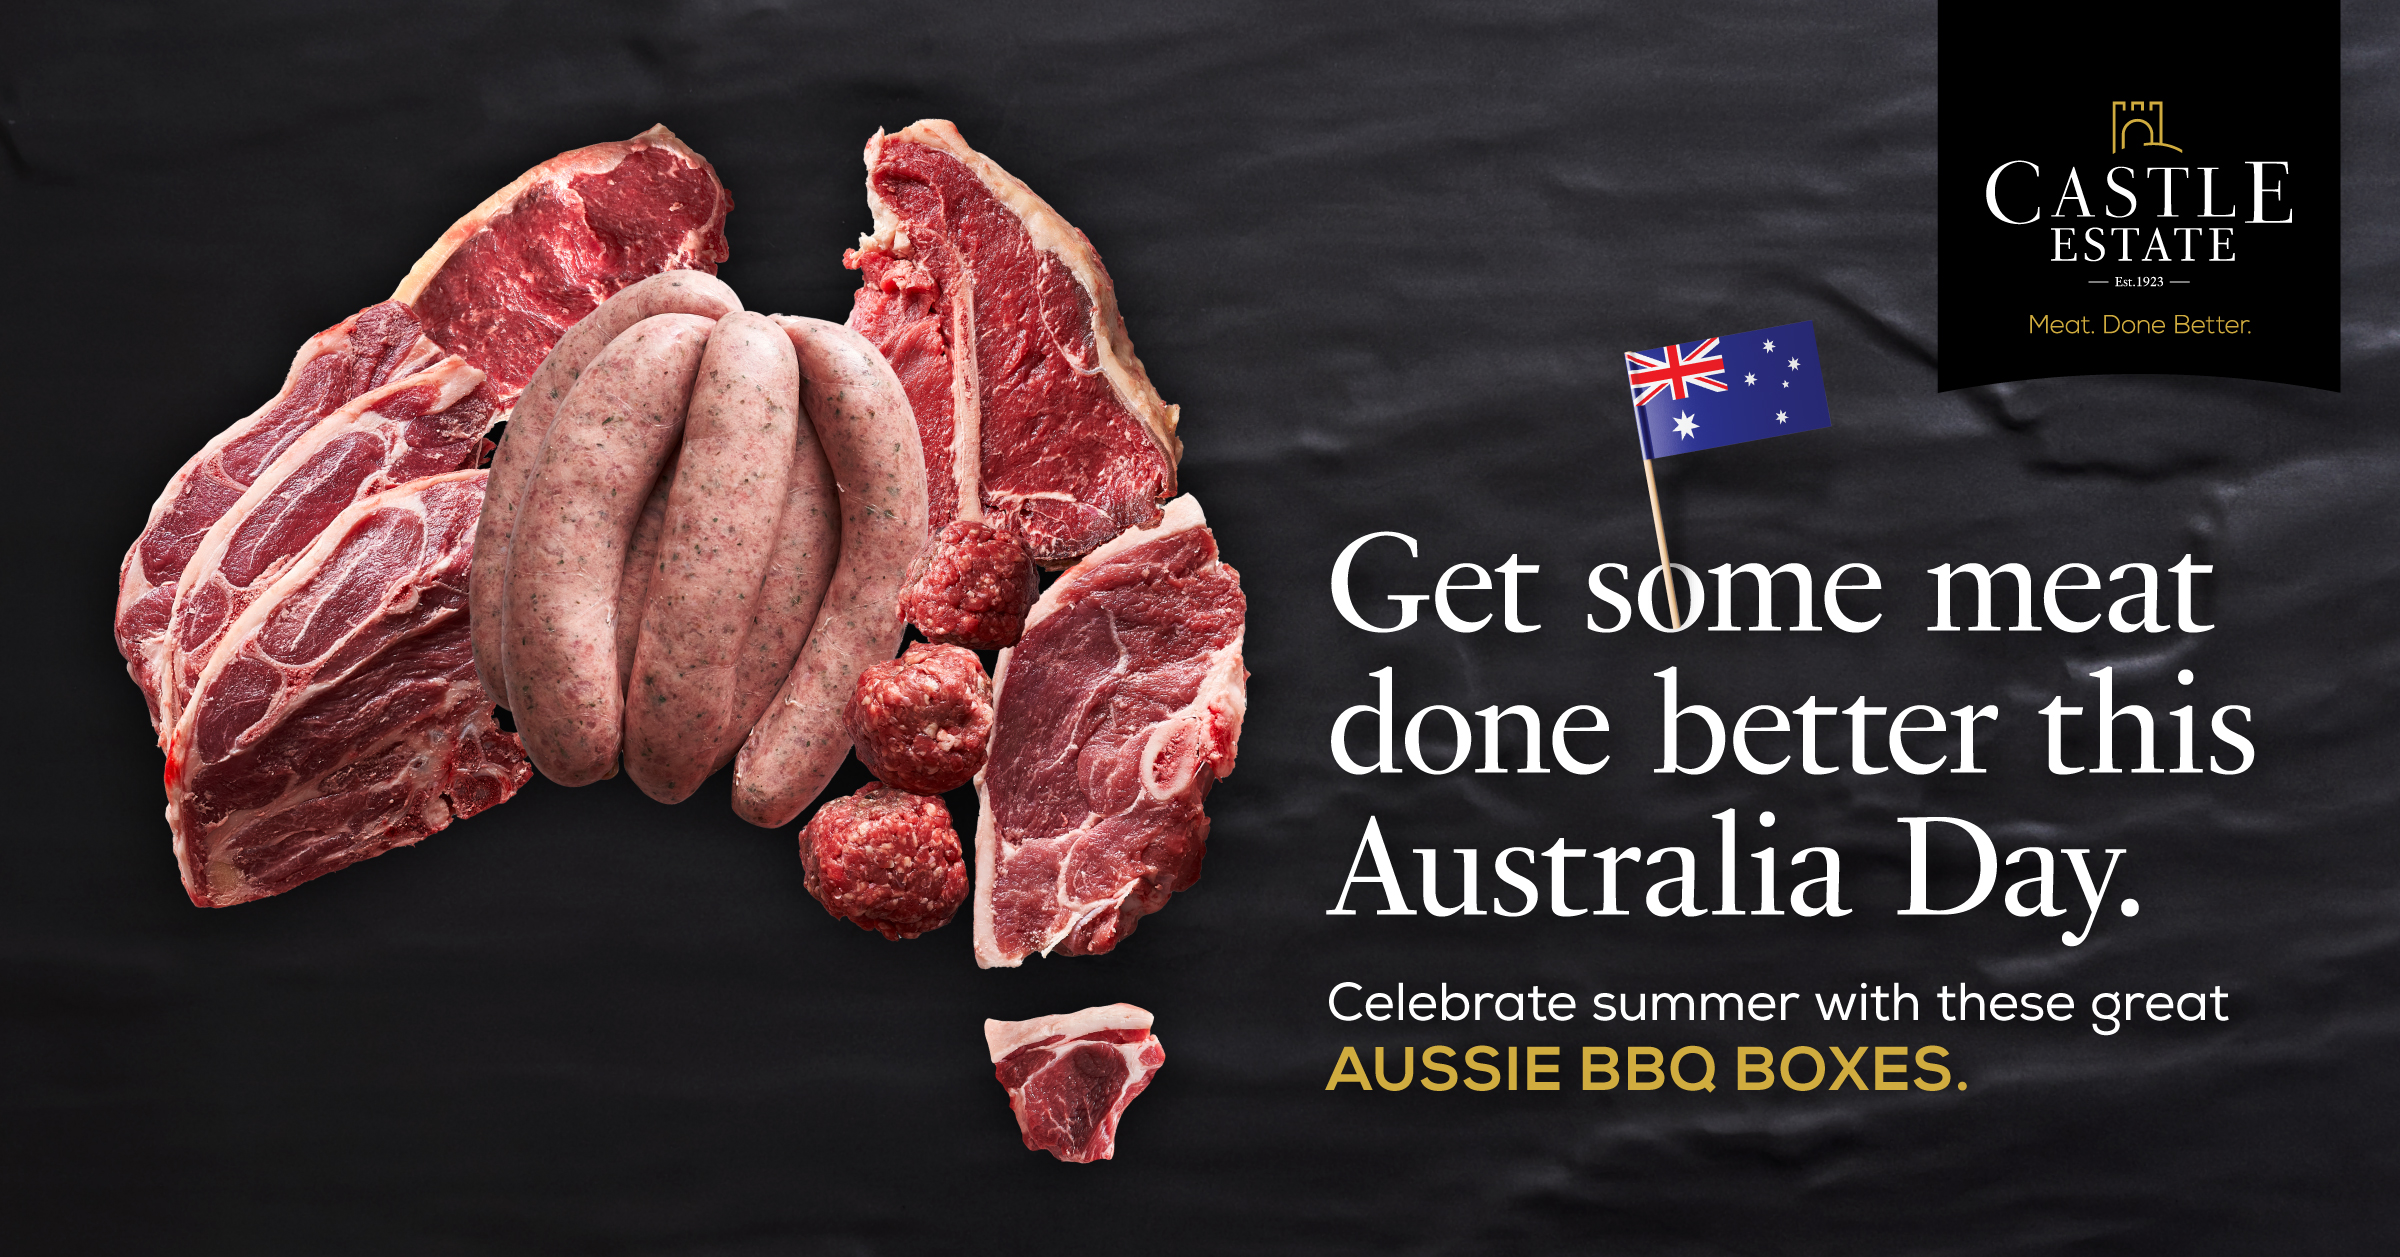 Get some meat done better this Australia Day. Celebrate summer with these great Aussie BBQ Boxes.